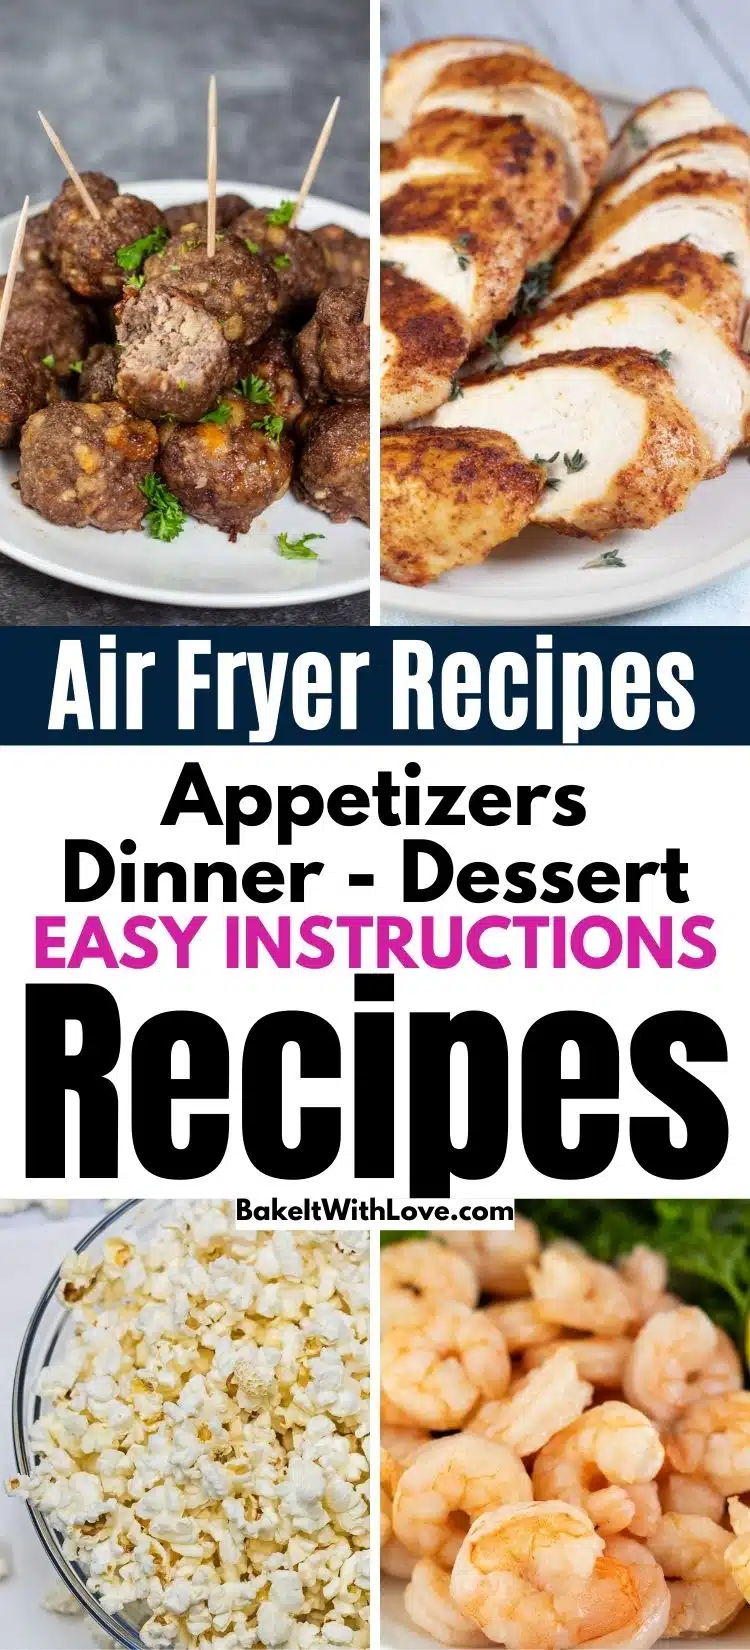 Pin split image with text showing different air fryer recipe ideas.